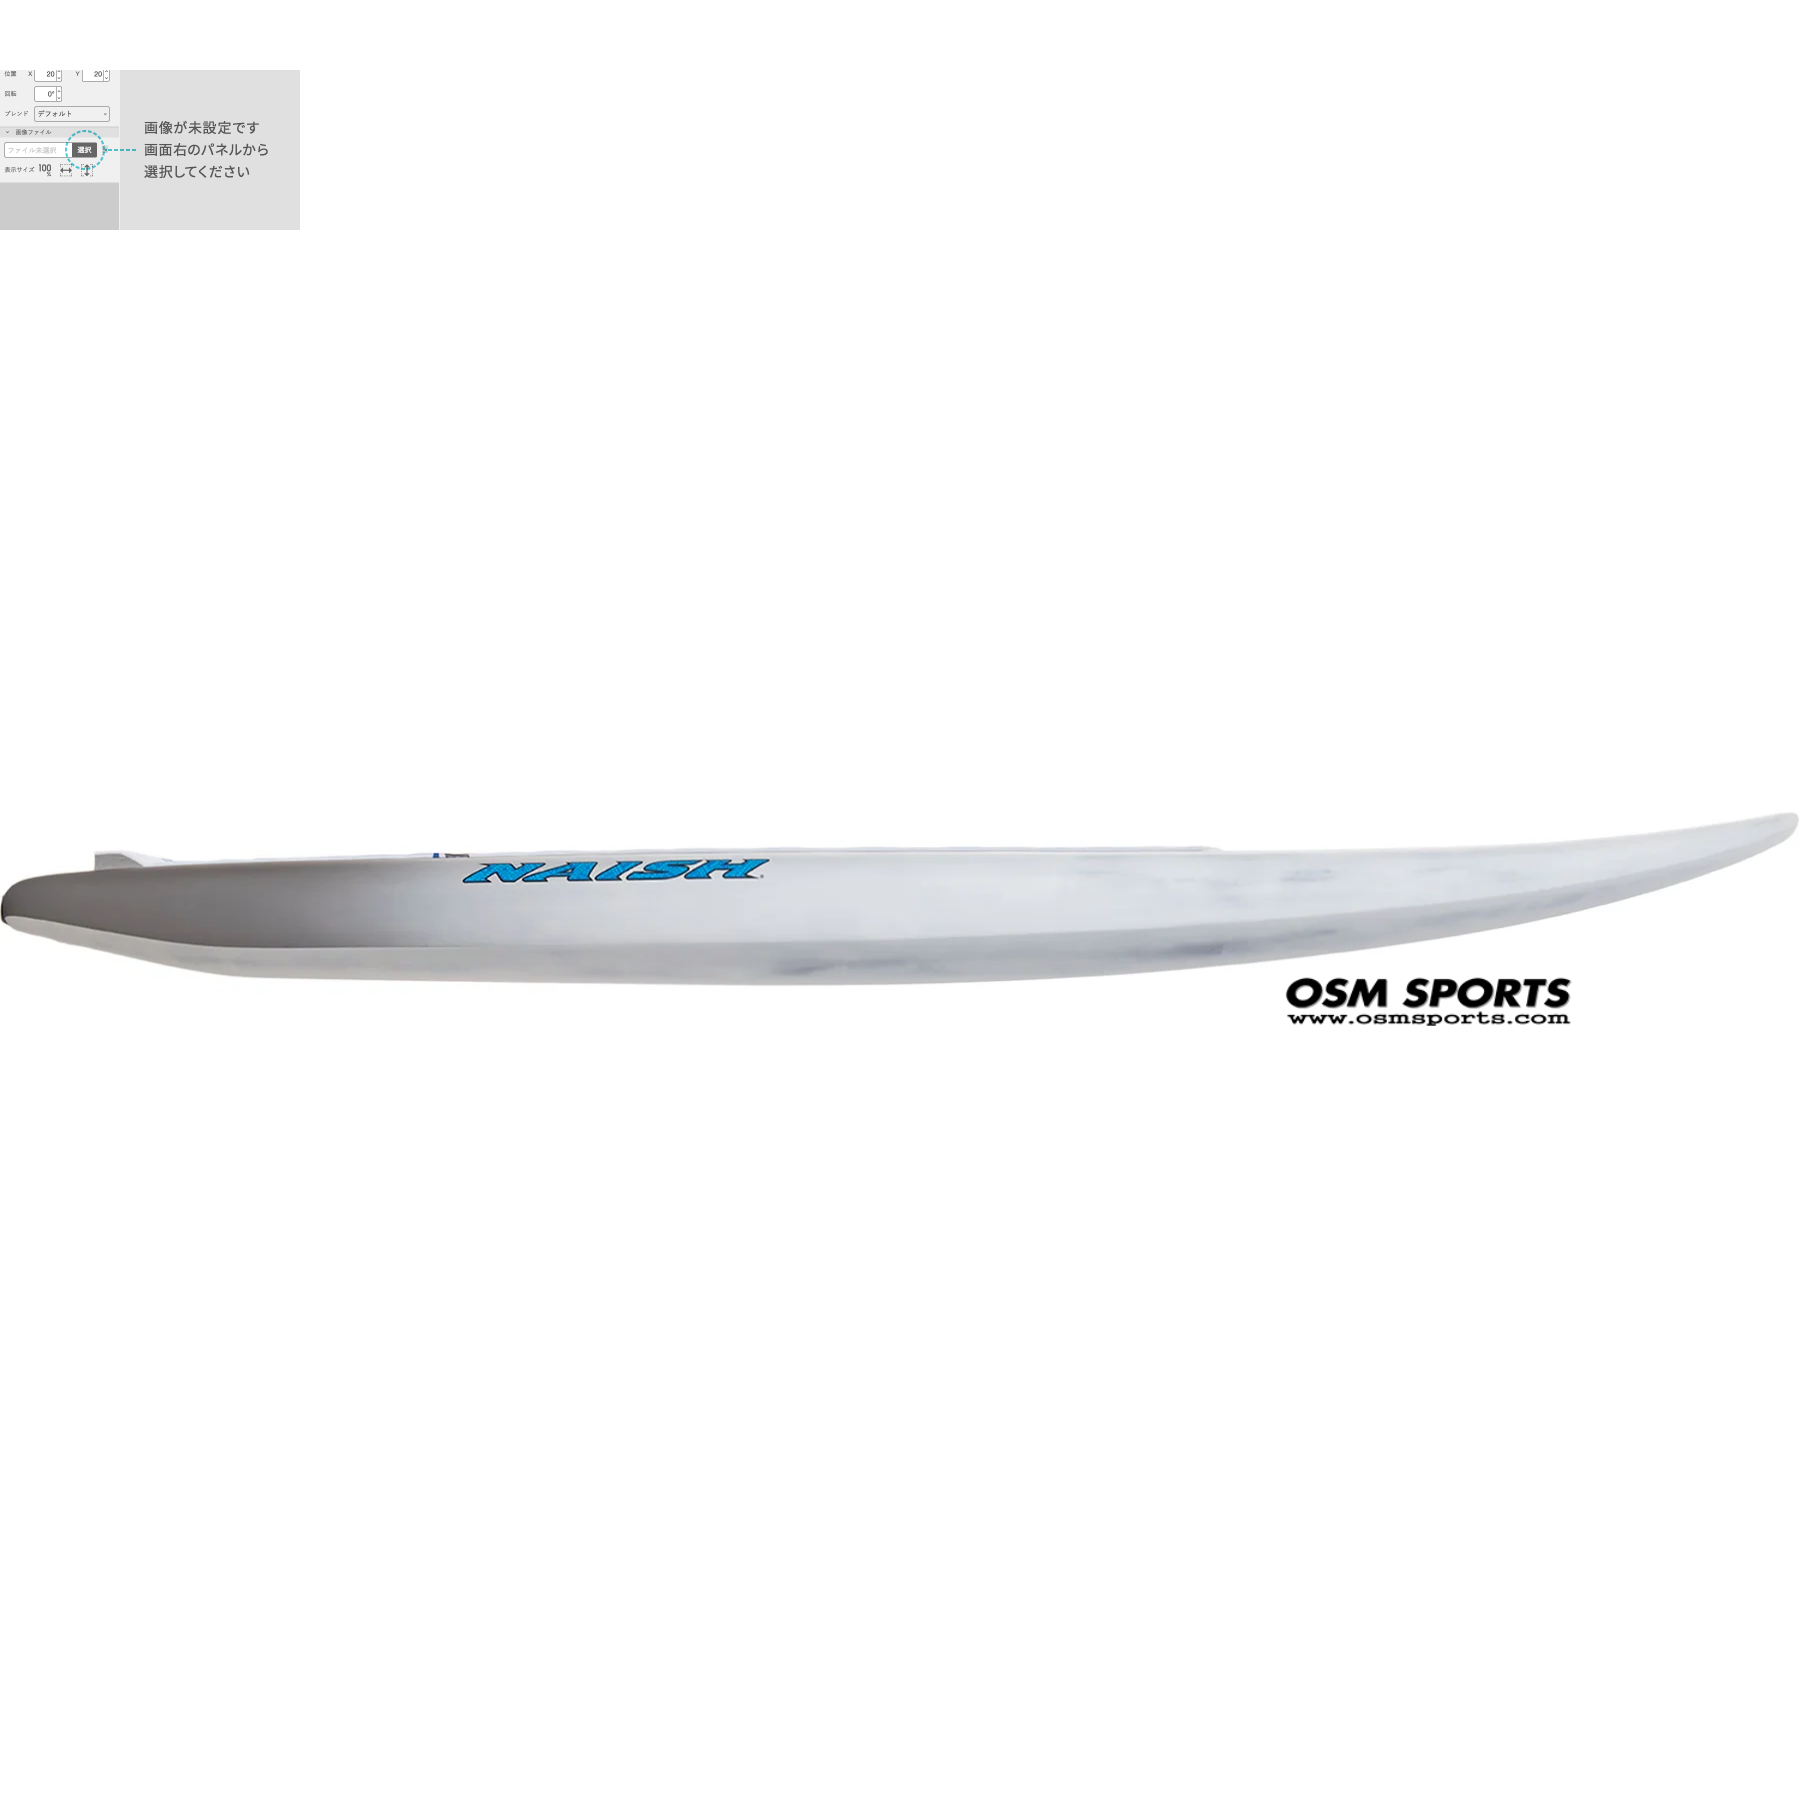 s26-naish-sup-board-hover-wing-foil-carbon-ultra-cu-95-side_1800x1800_20230319203047328.png